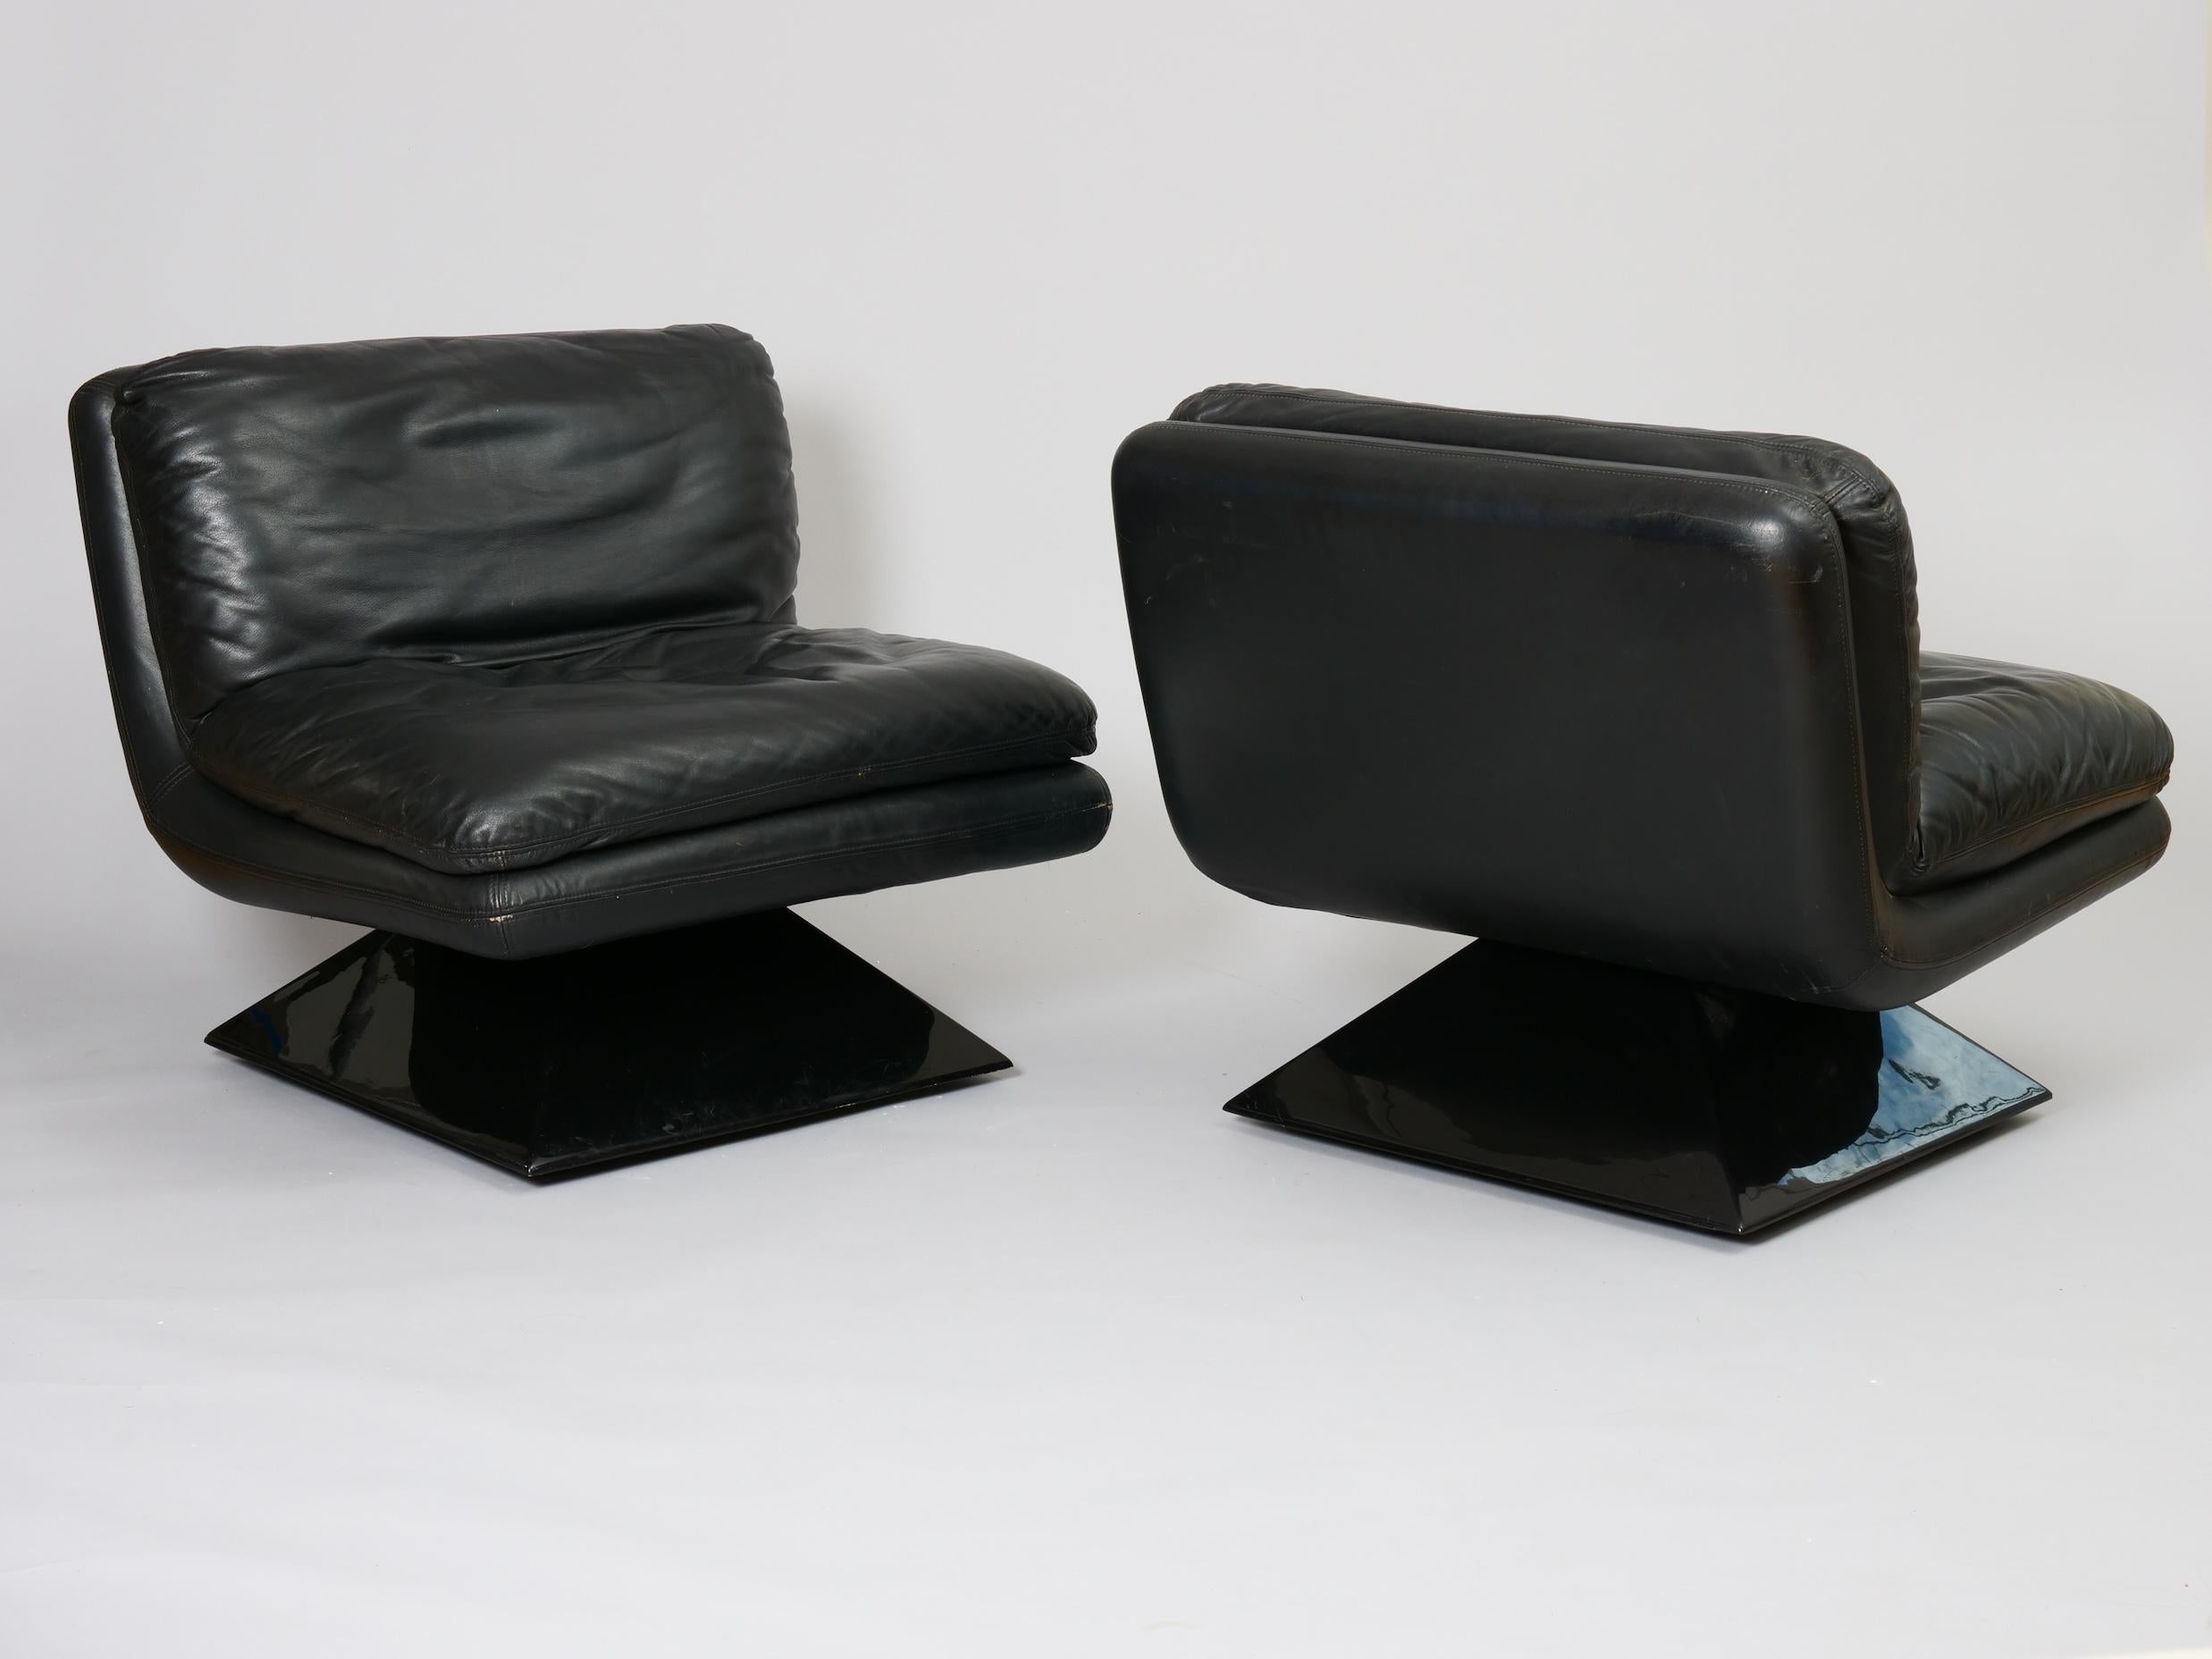 Set of three sculptural lounge chairs in soft black leather on a pyramid shape acrylic base

In very good condition

Comfortable!